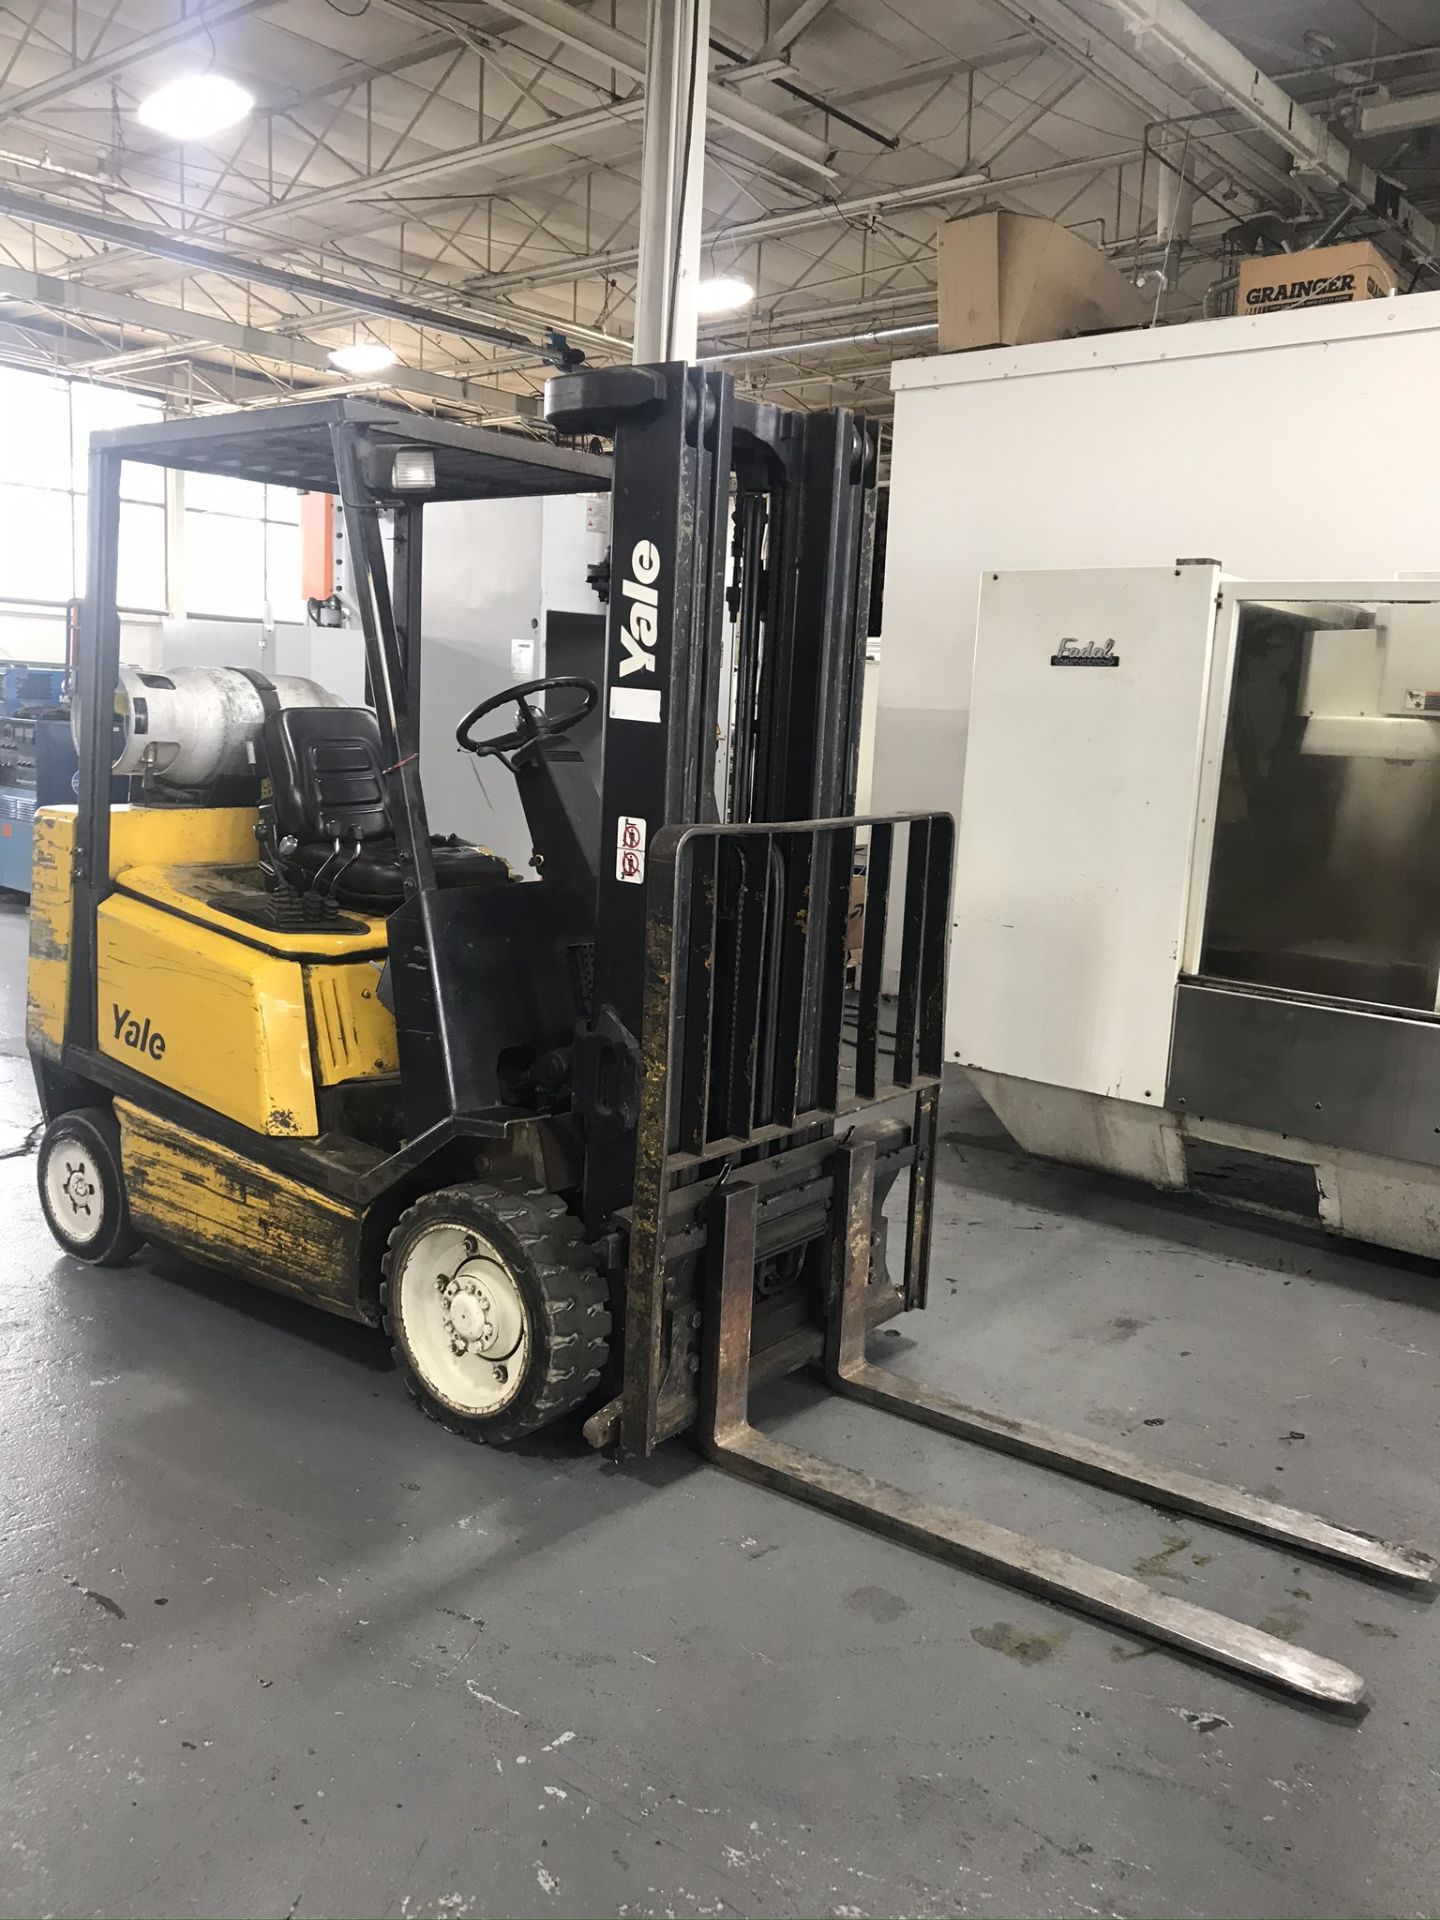 Yale Lift Truck 4,500 Lb. Capacity, 189” Max Lift (2-Stage), Side Shift, LP Gas